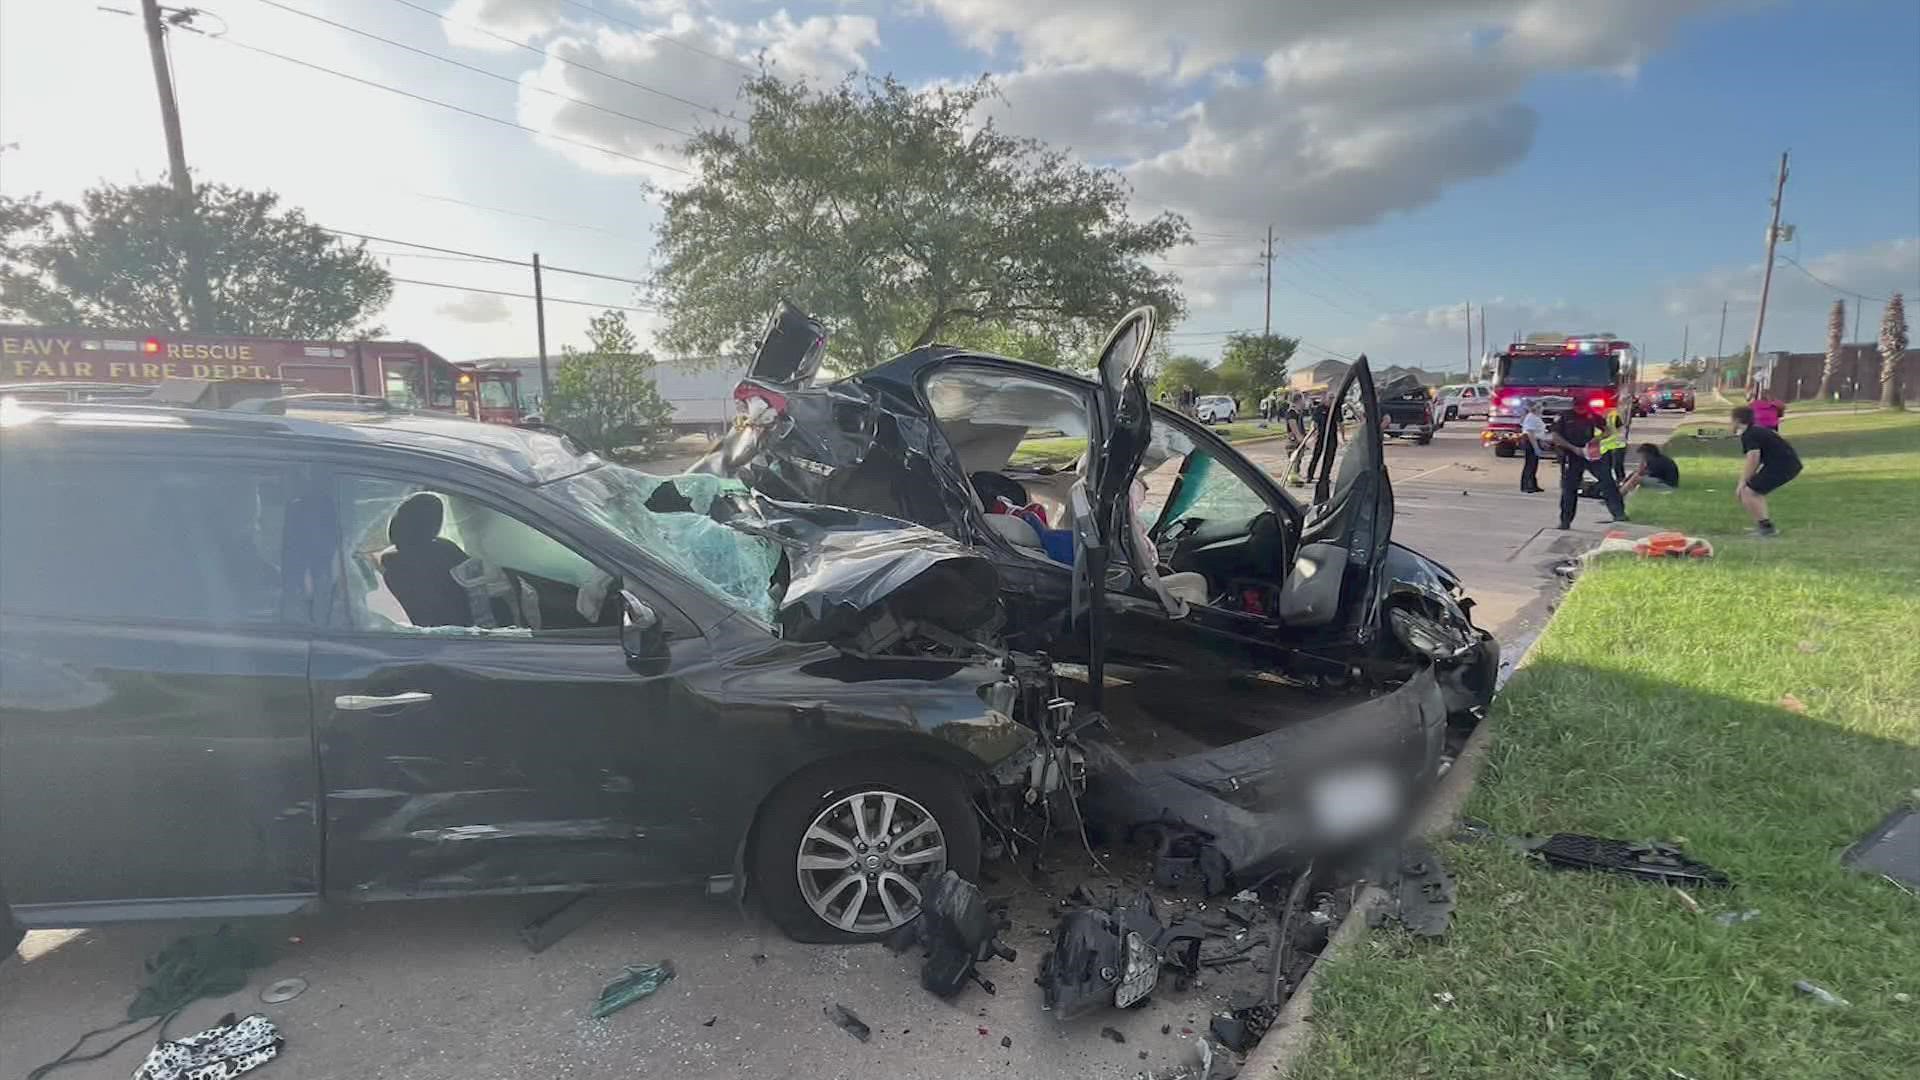 At least one person is dead after a chase ended in a five-vehicle crash in northwest Harris County Friday, according to deputies.